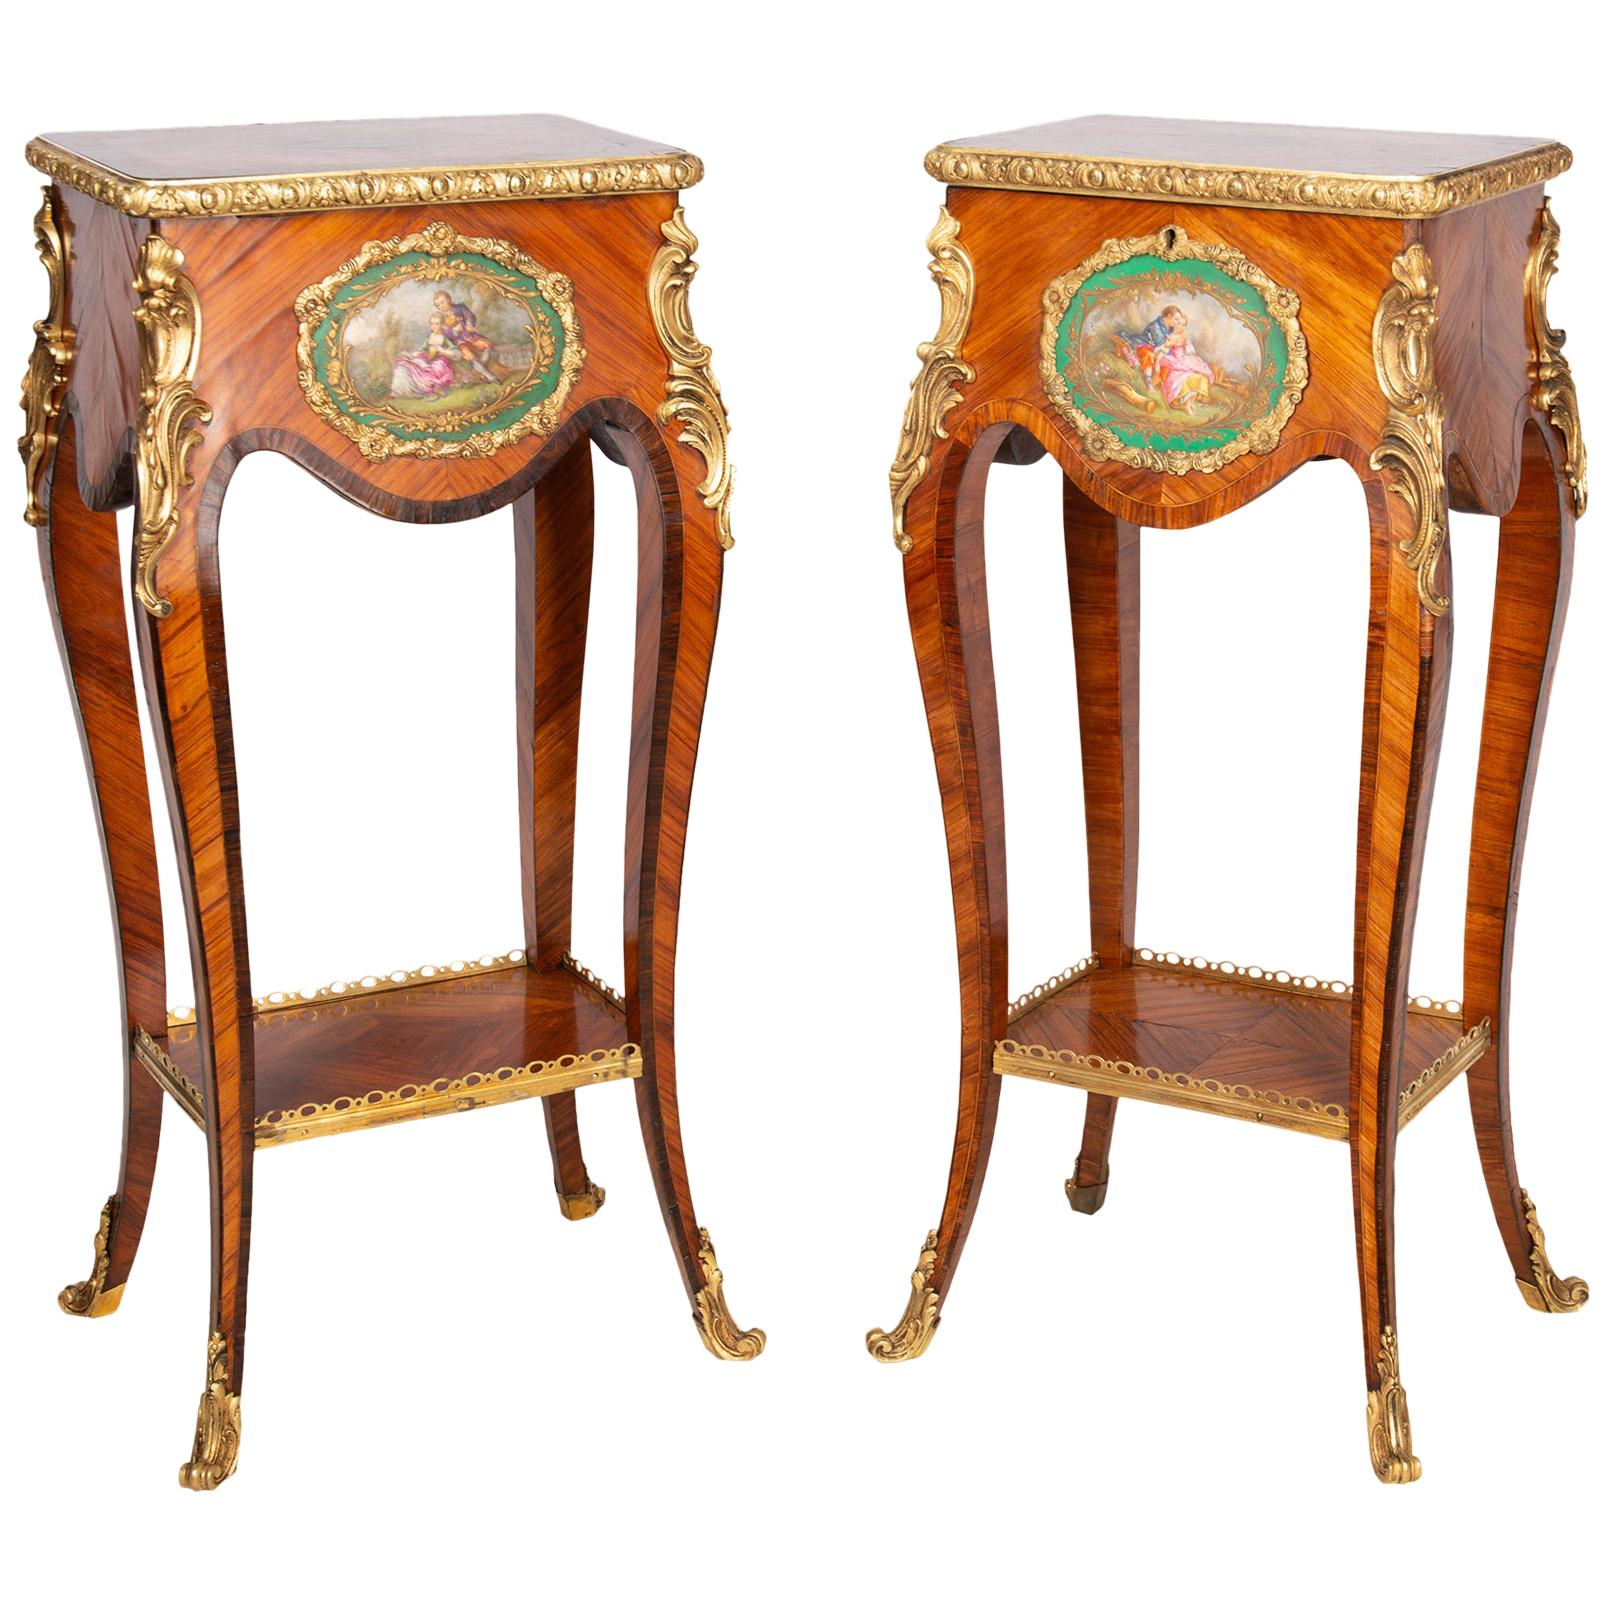 Pair of Louis XVI Style Side Tables with Porcelain Plaques, circa 1890